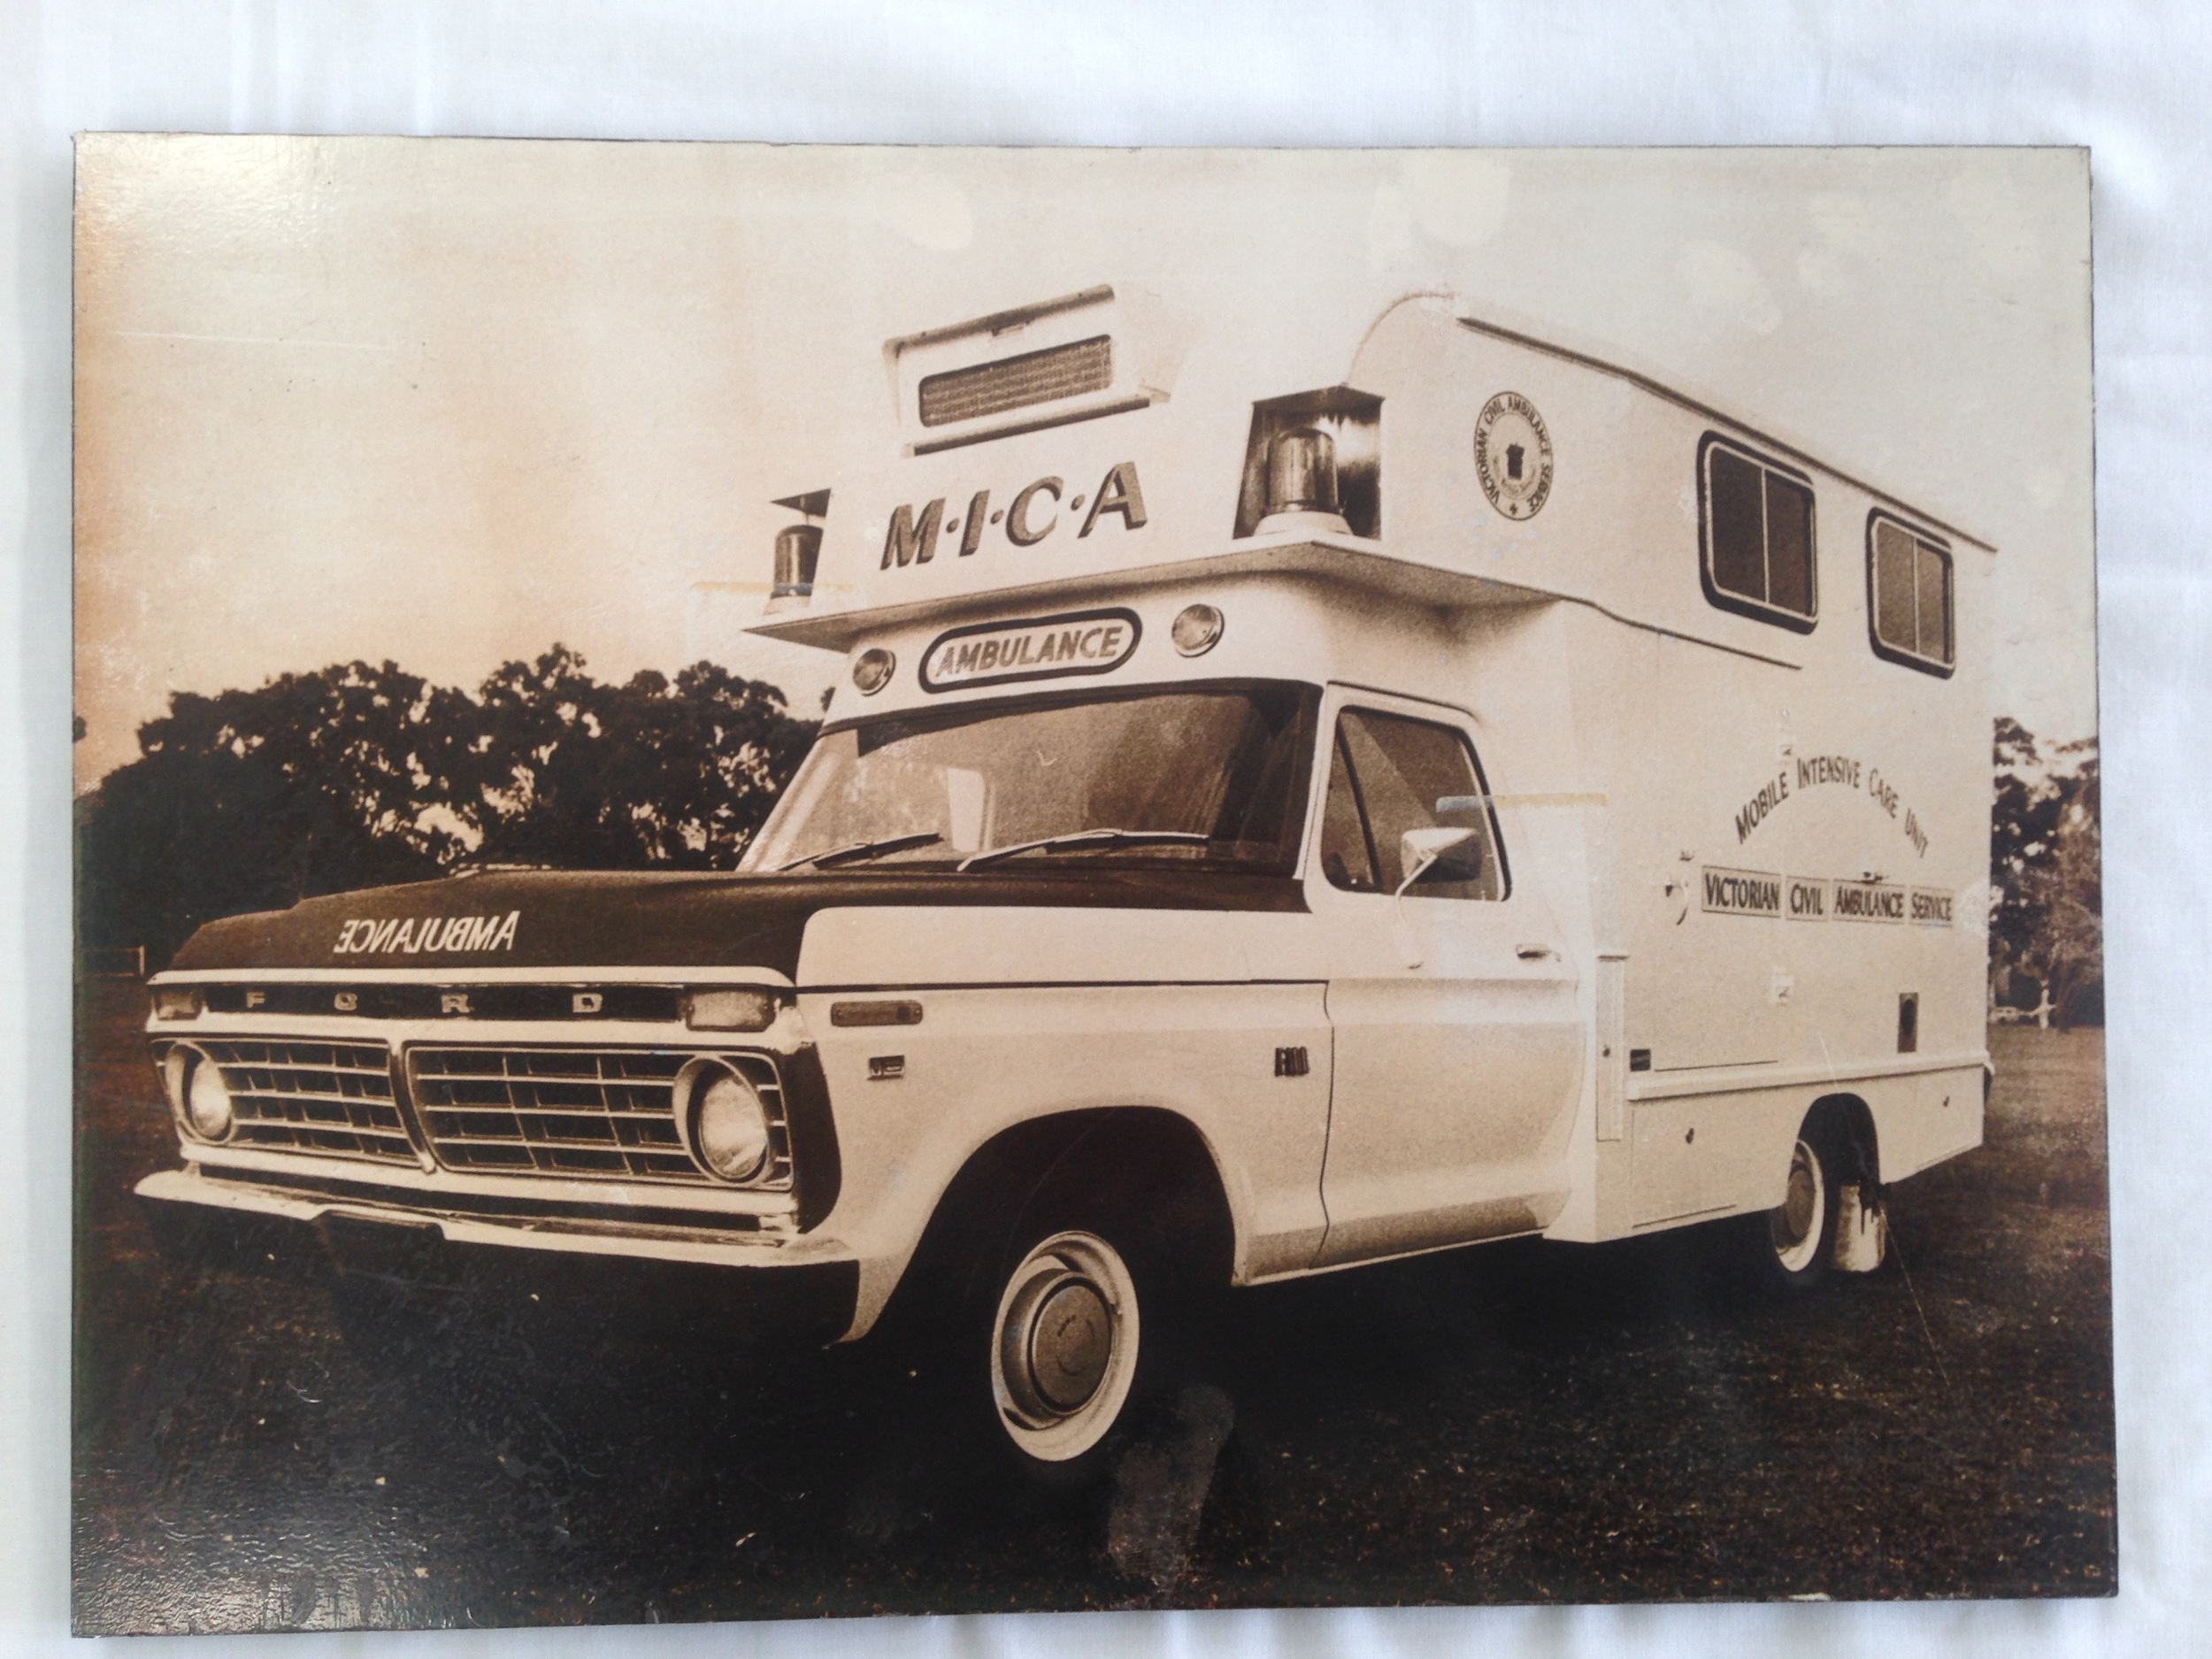  This first MICA ambulance was a retrofitted clinic transport bus in 1971. Mobile Intensive Care Ambulances in Victoria were initiated after the advantage of mobile coronary care units was recognised and a recommendation that ambulance officers recei